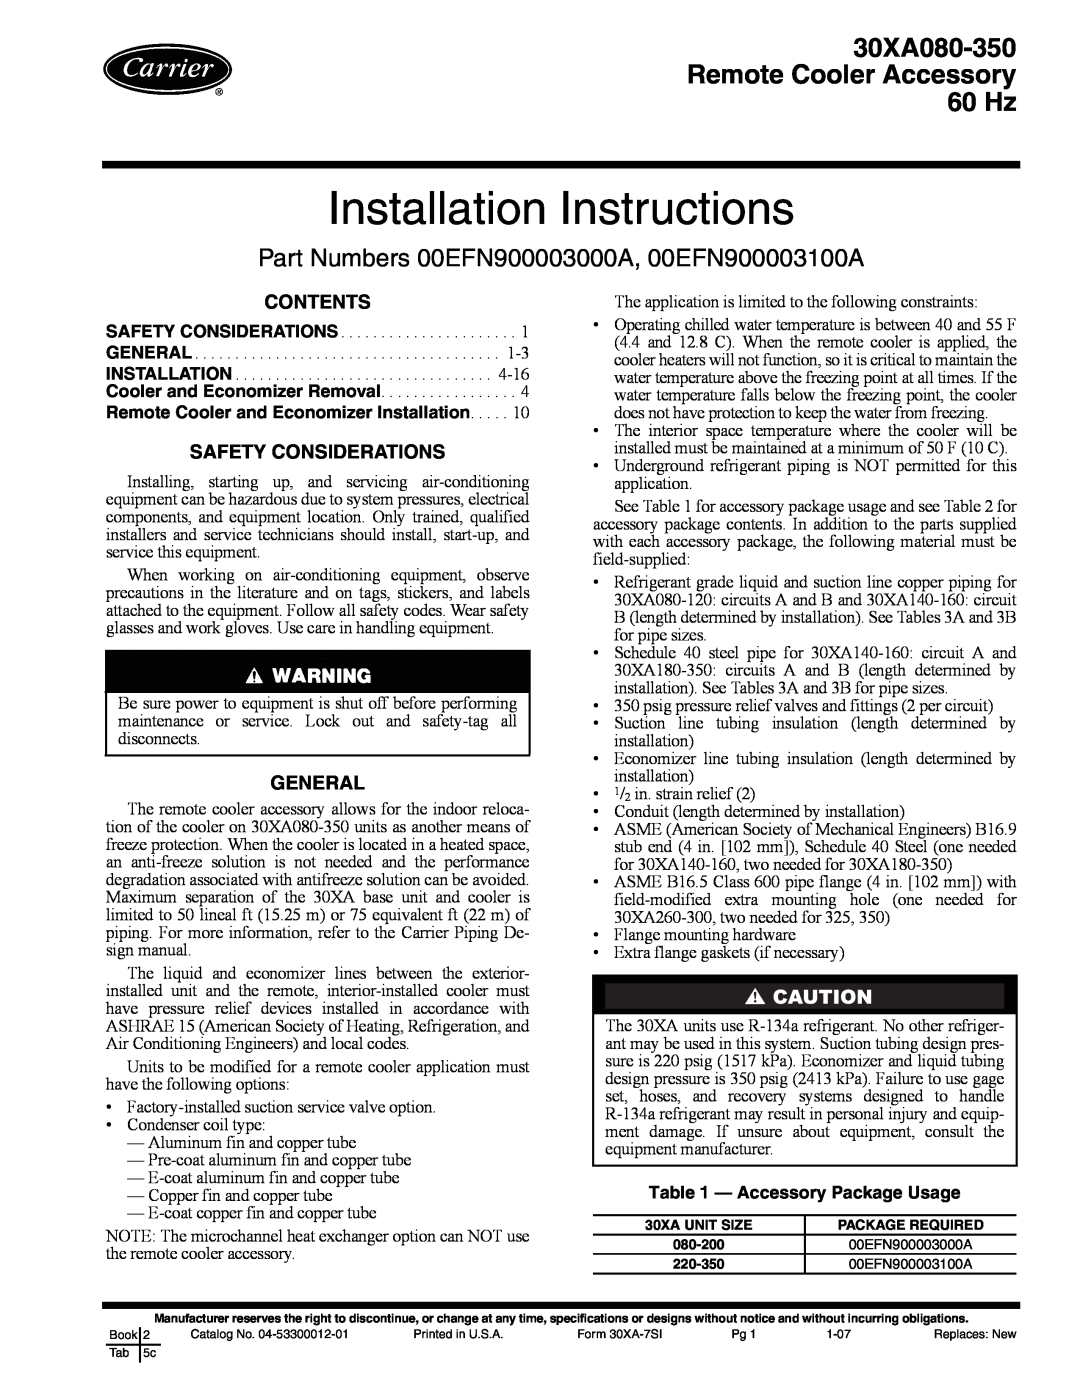 Carrier 00EFN900003000A installation instructions Contents, Safety Considerations, General, Accessory Package Usage 